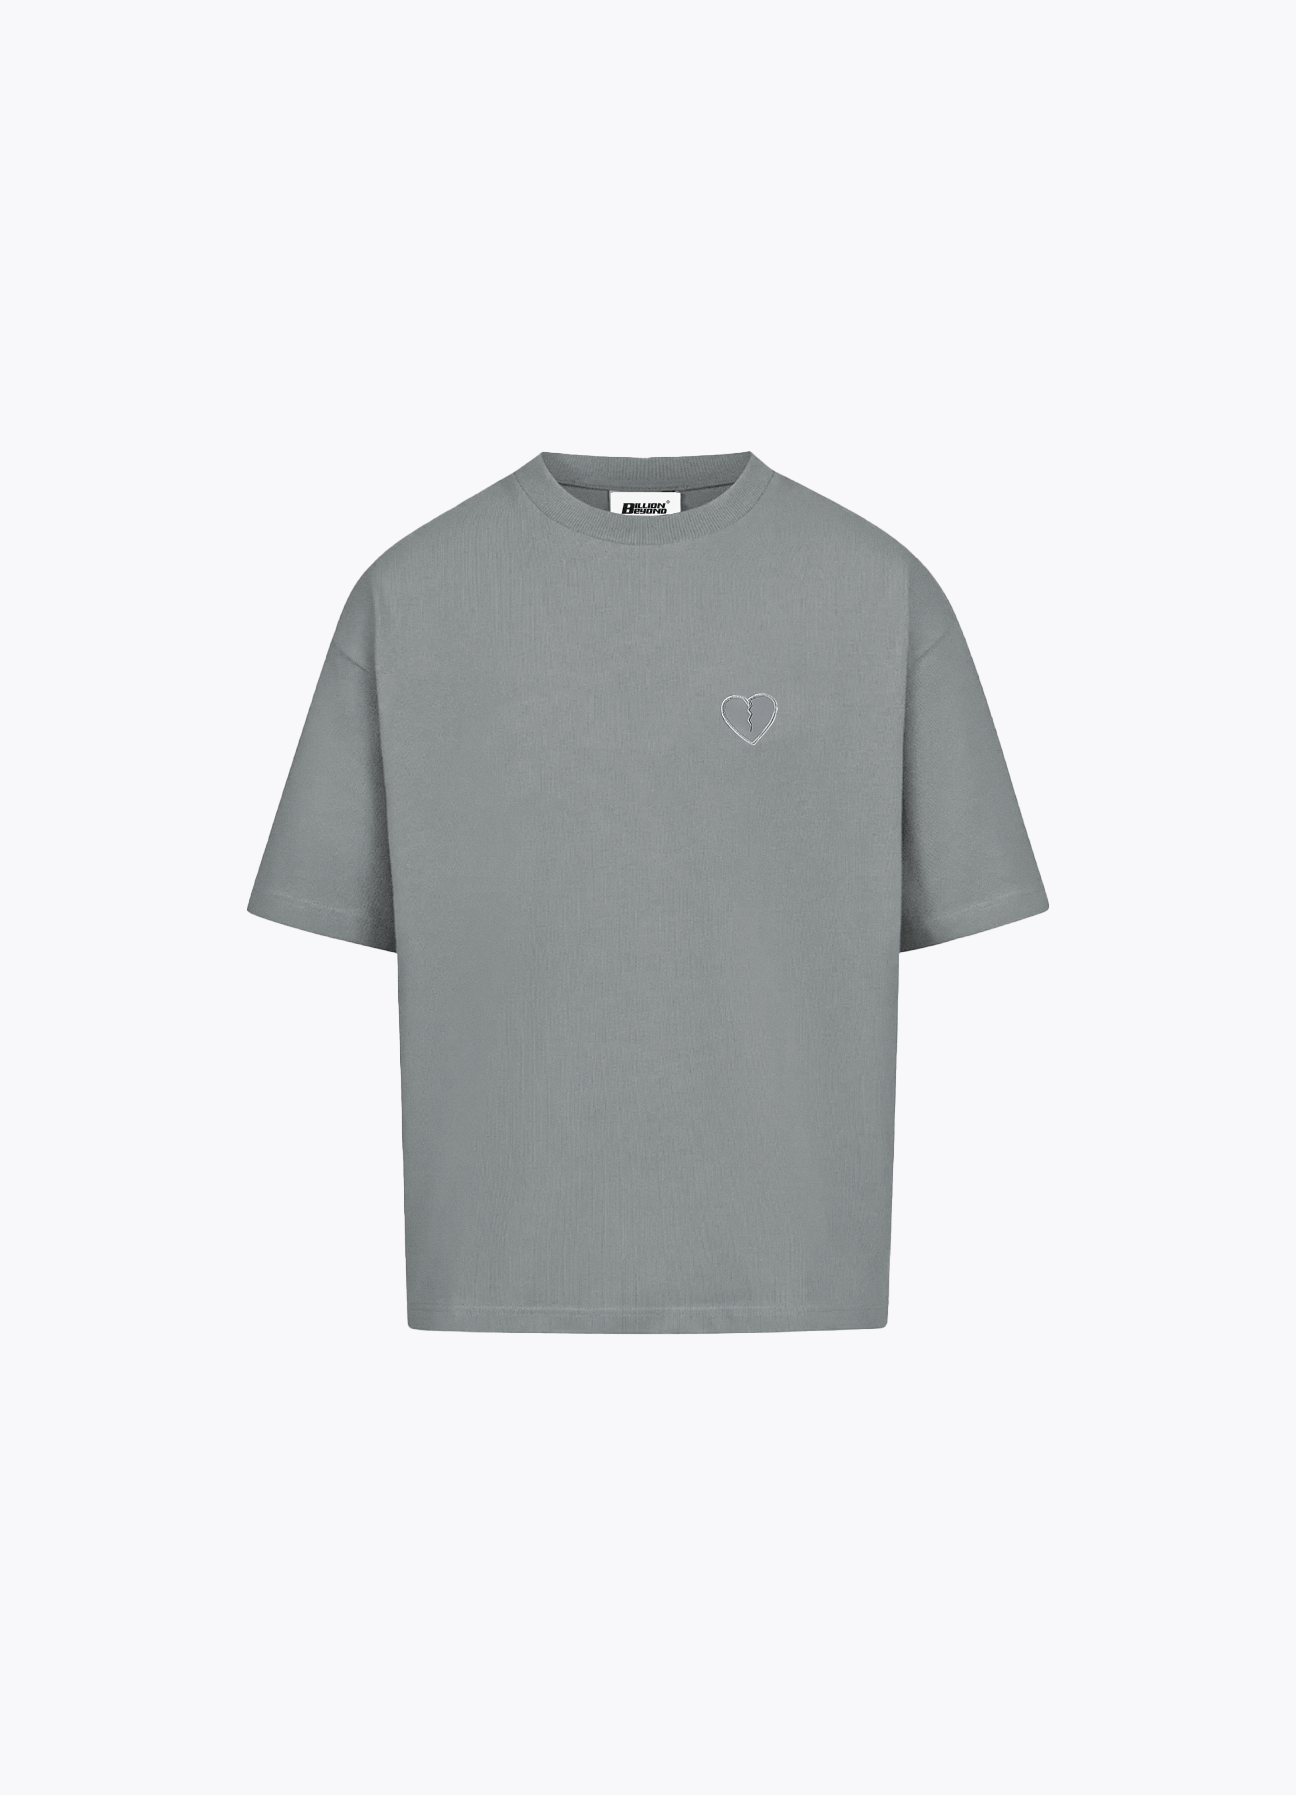 BILLION AND BEYOND - BASIC TEE OYSTER